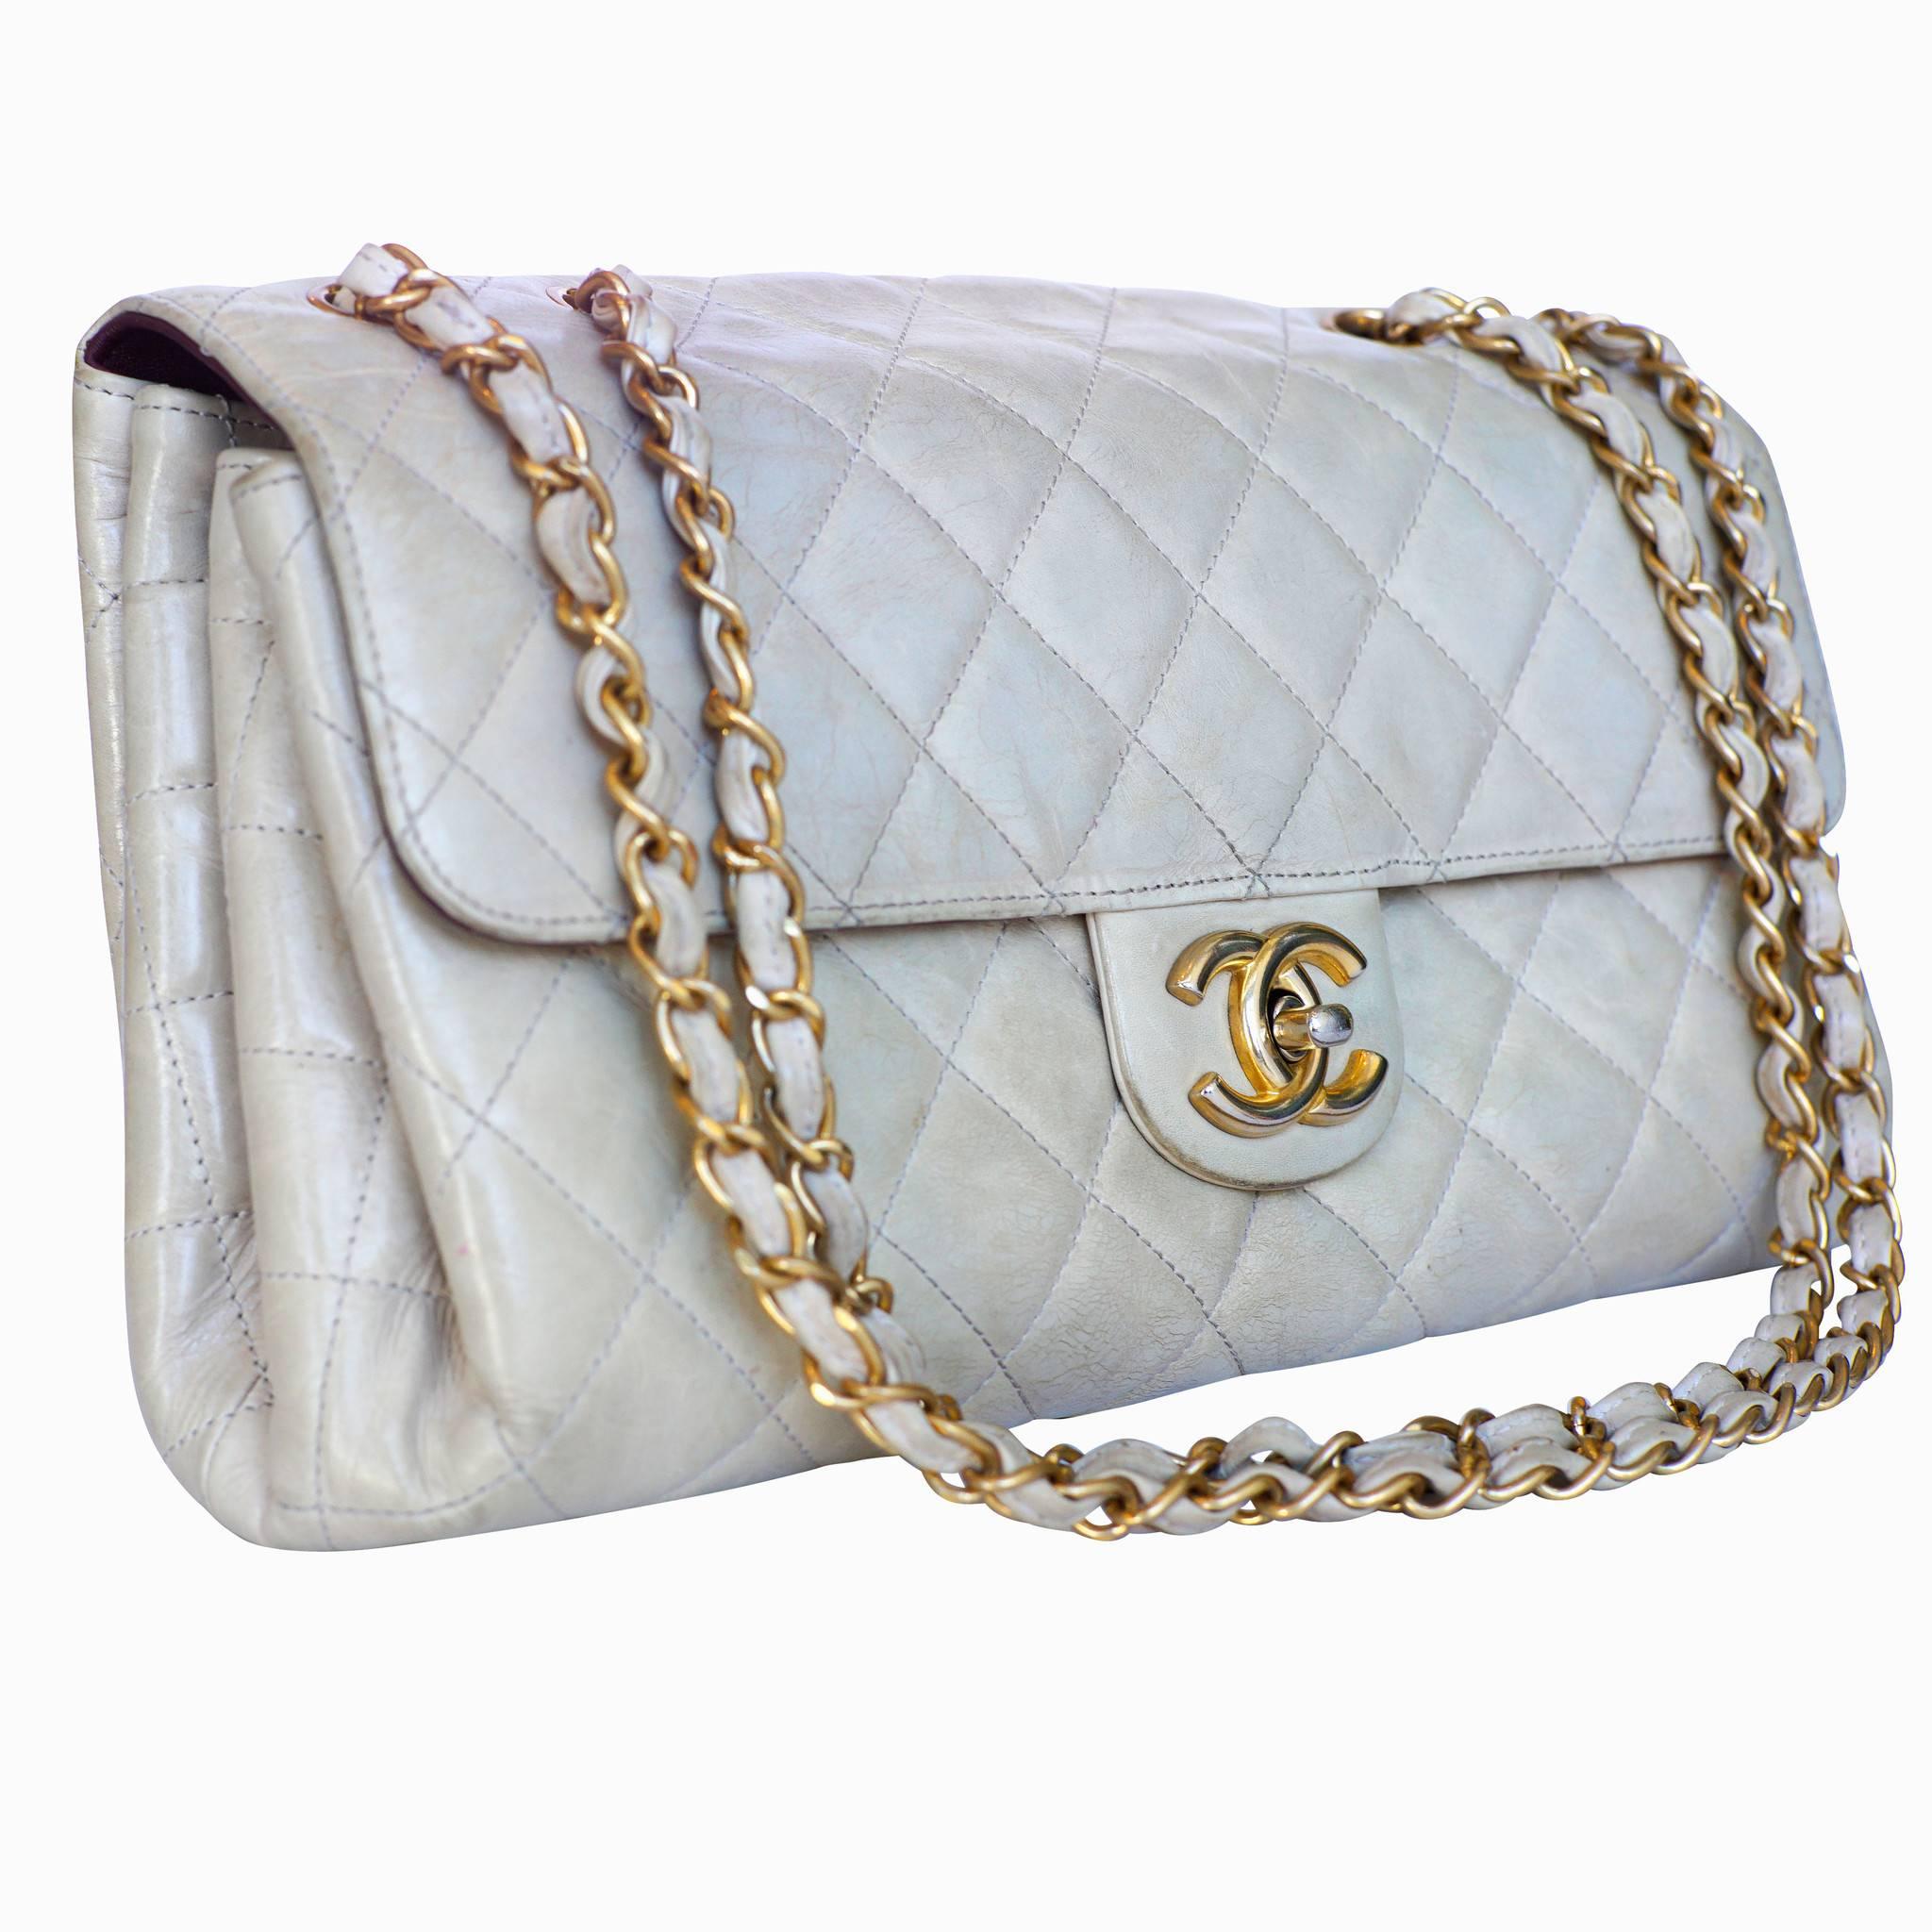 Chanel classic Jumbo flap bag in cream colored lambskin with gold double chain and  burgundy interior.

-Measurements-
length:11.5